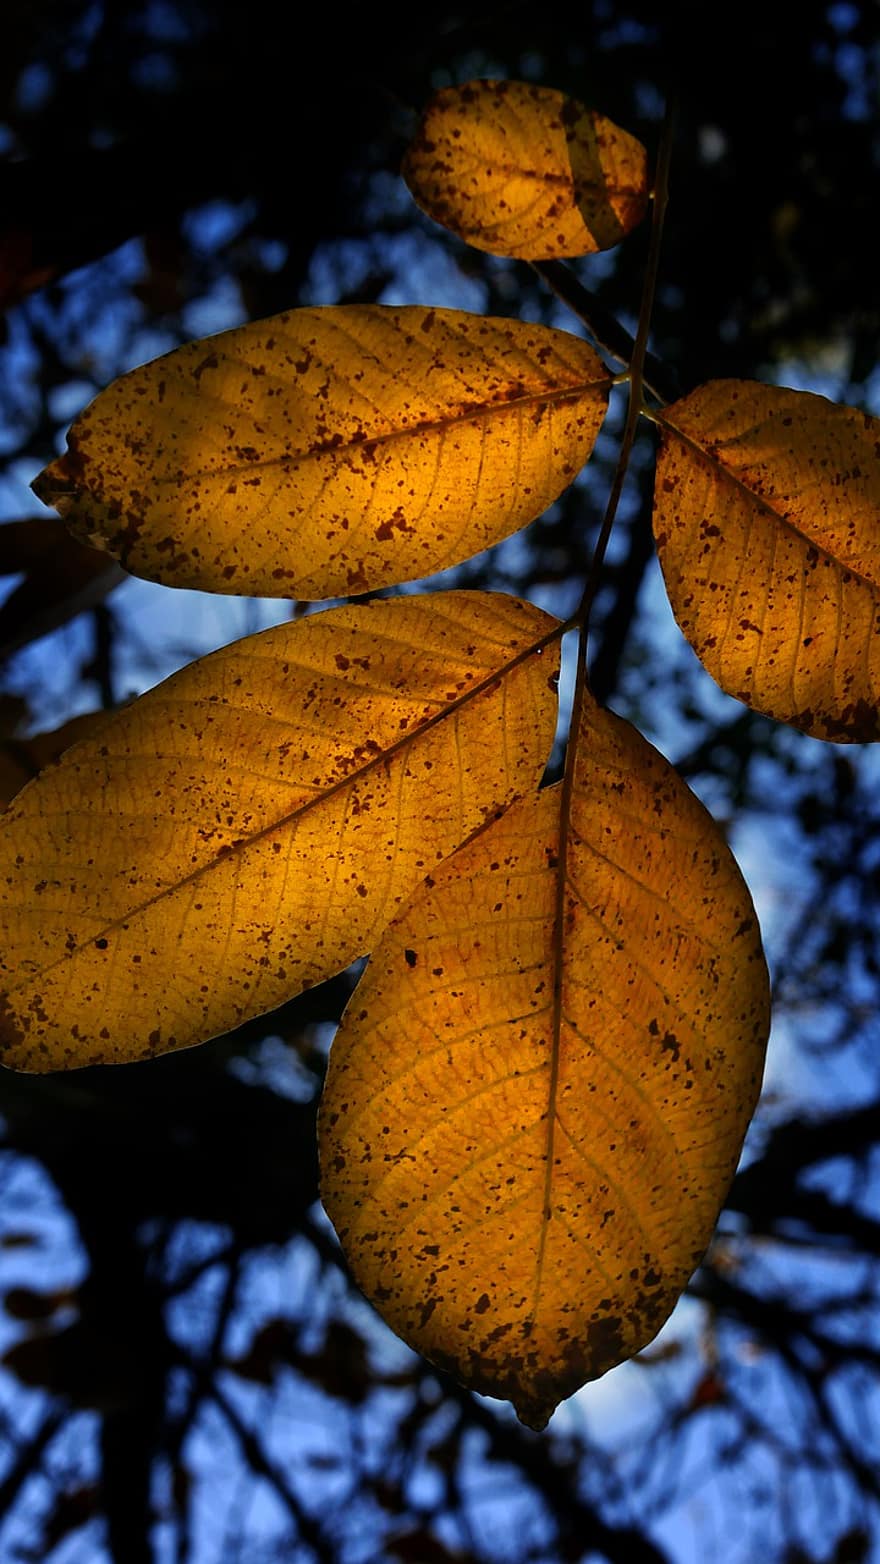 Leaves, Foliage, Branches, Fall, Light, Sheets